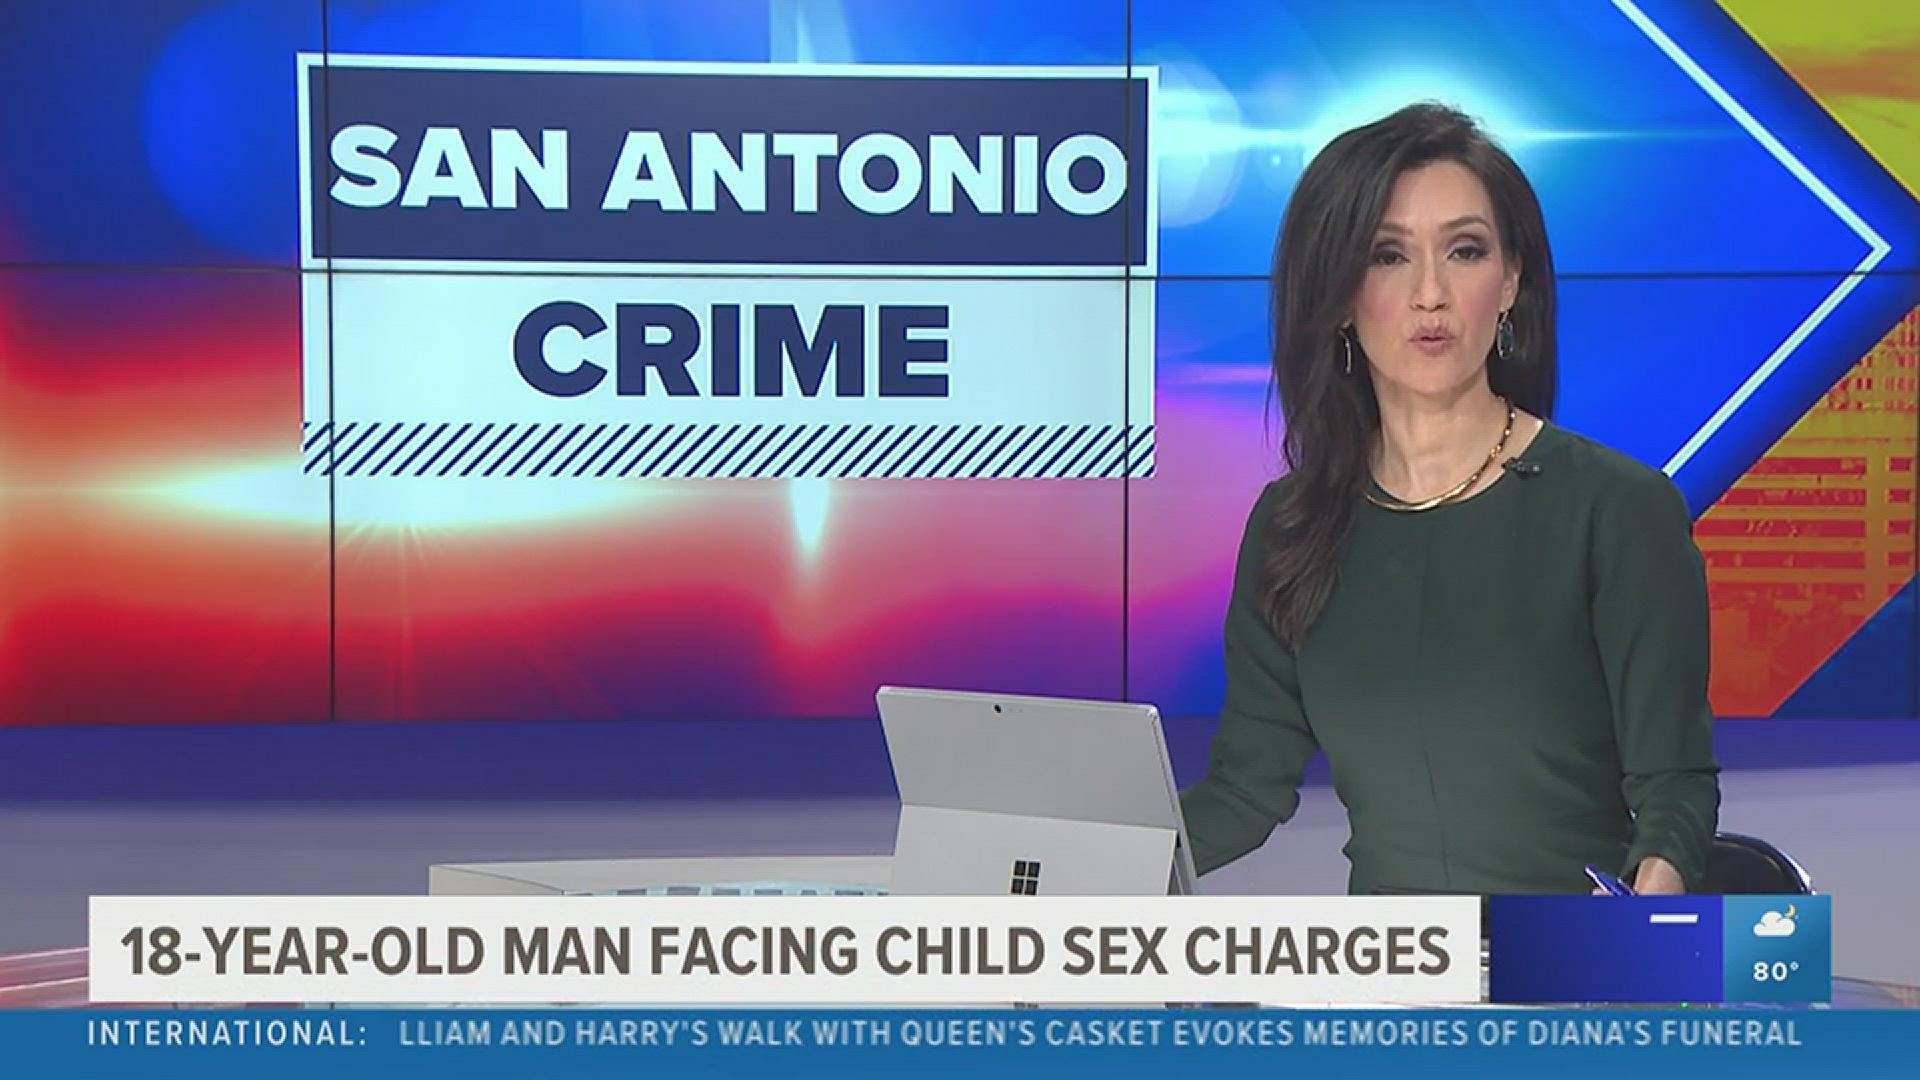 Sexxx Girl And Boy18years - 18-year-old arrested and facing three child sex charges | kens5.com